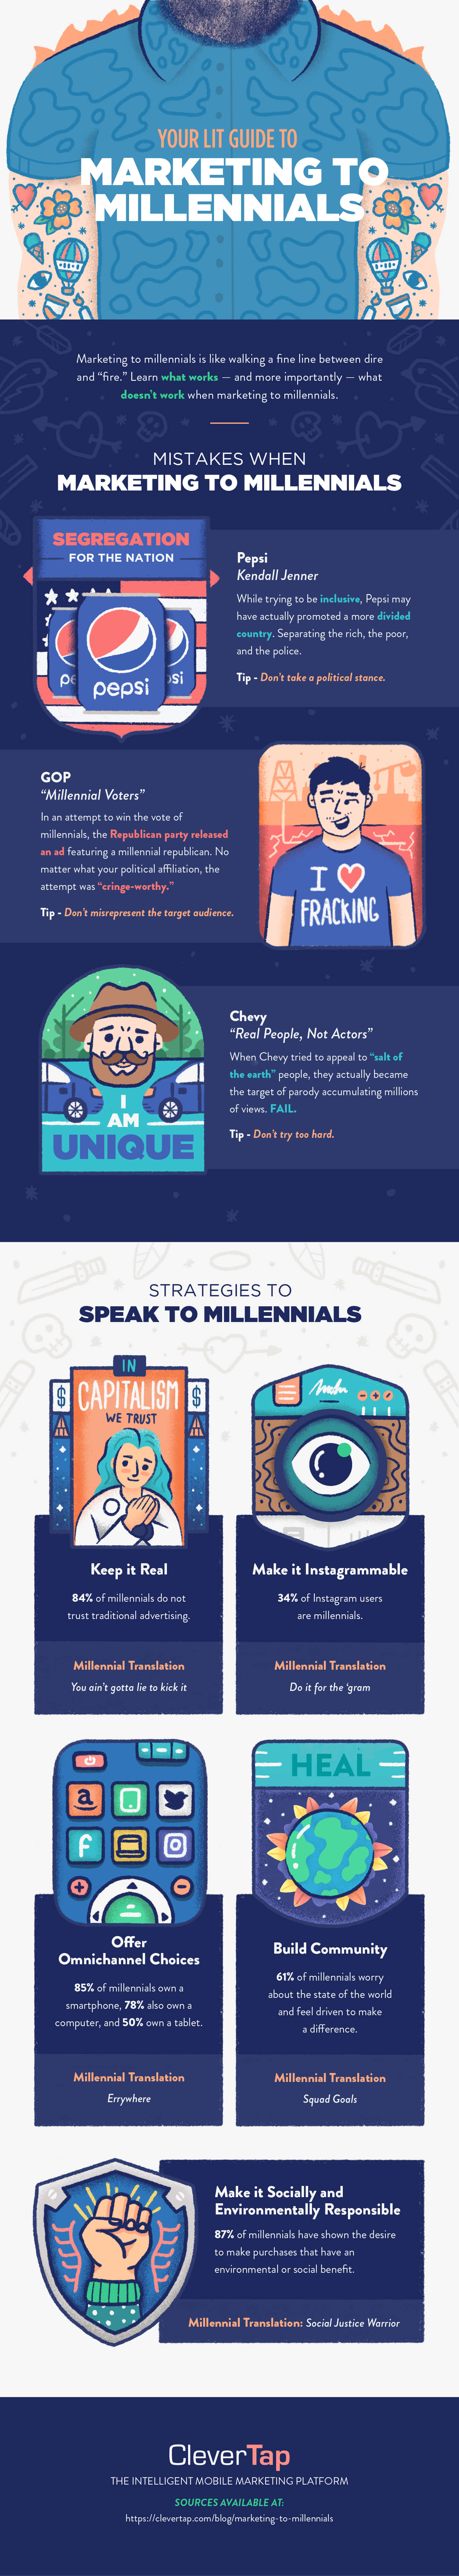 CleverTap reveals how brands can better market to millennials to stay relevant